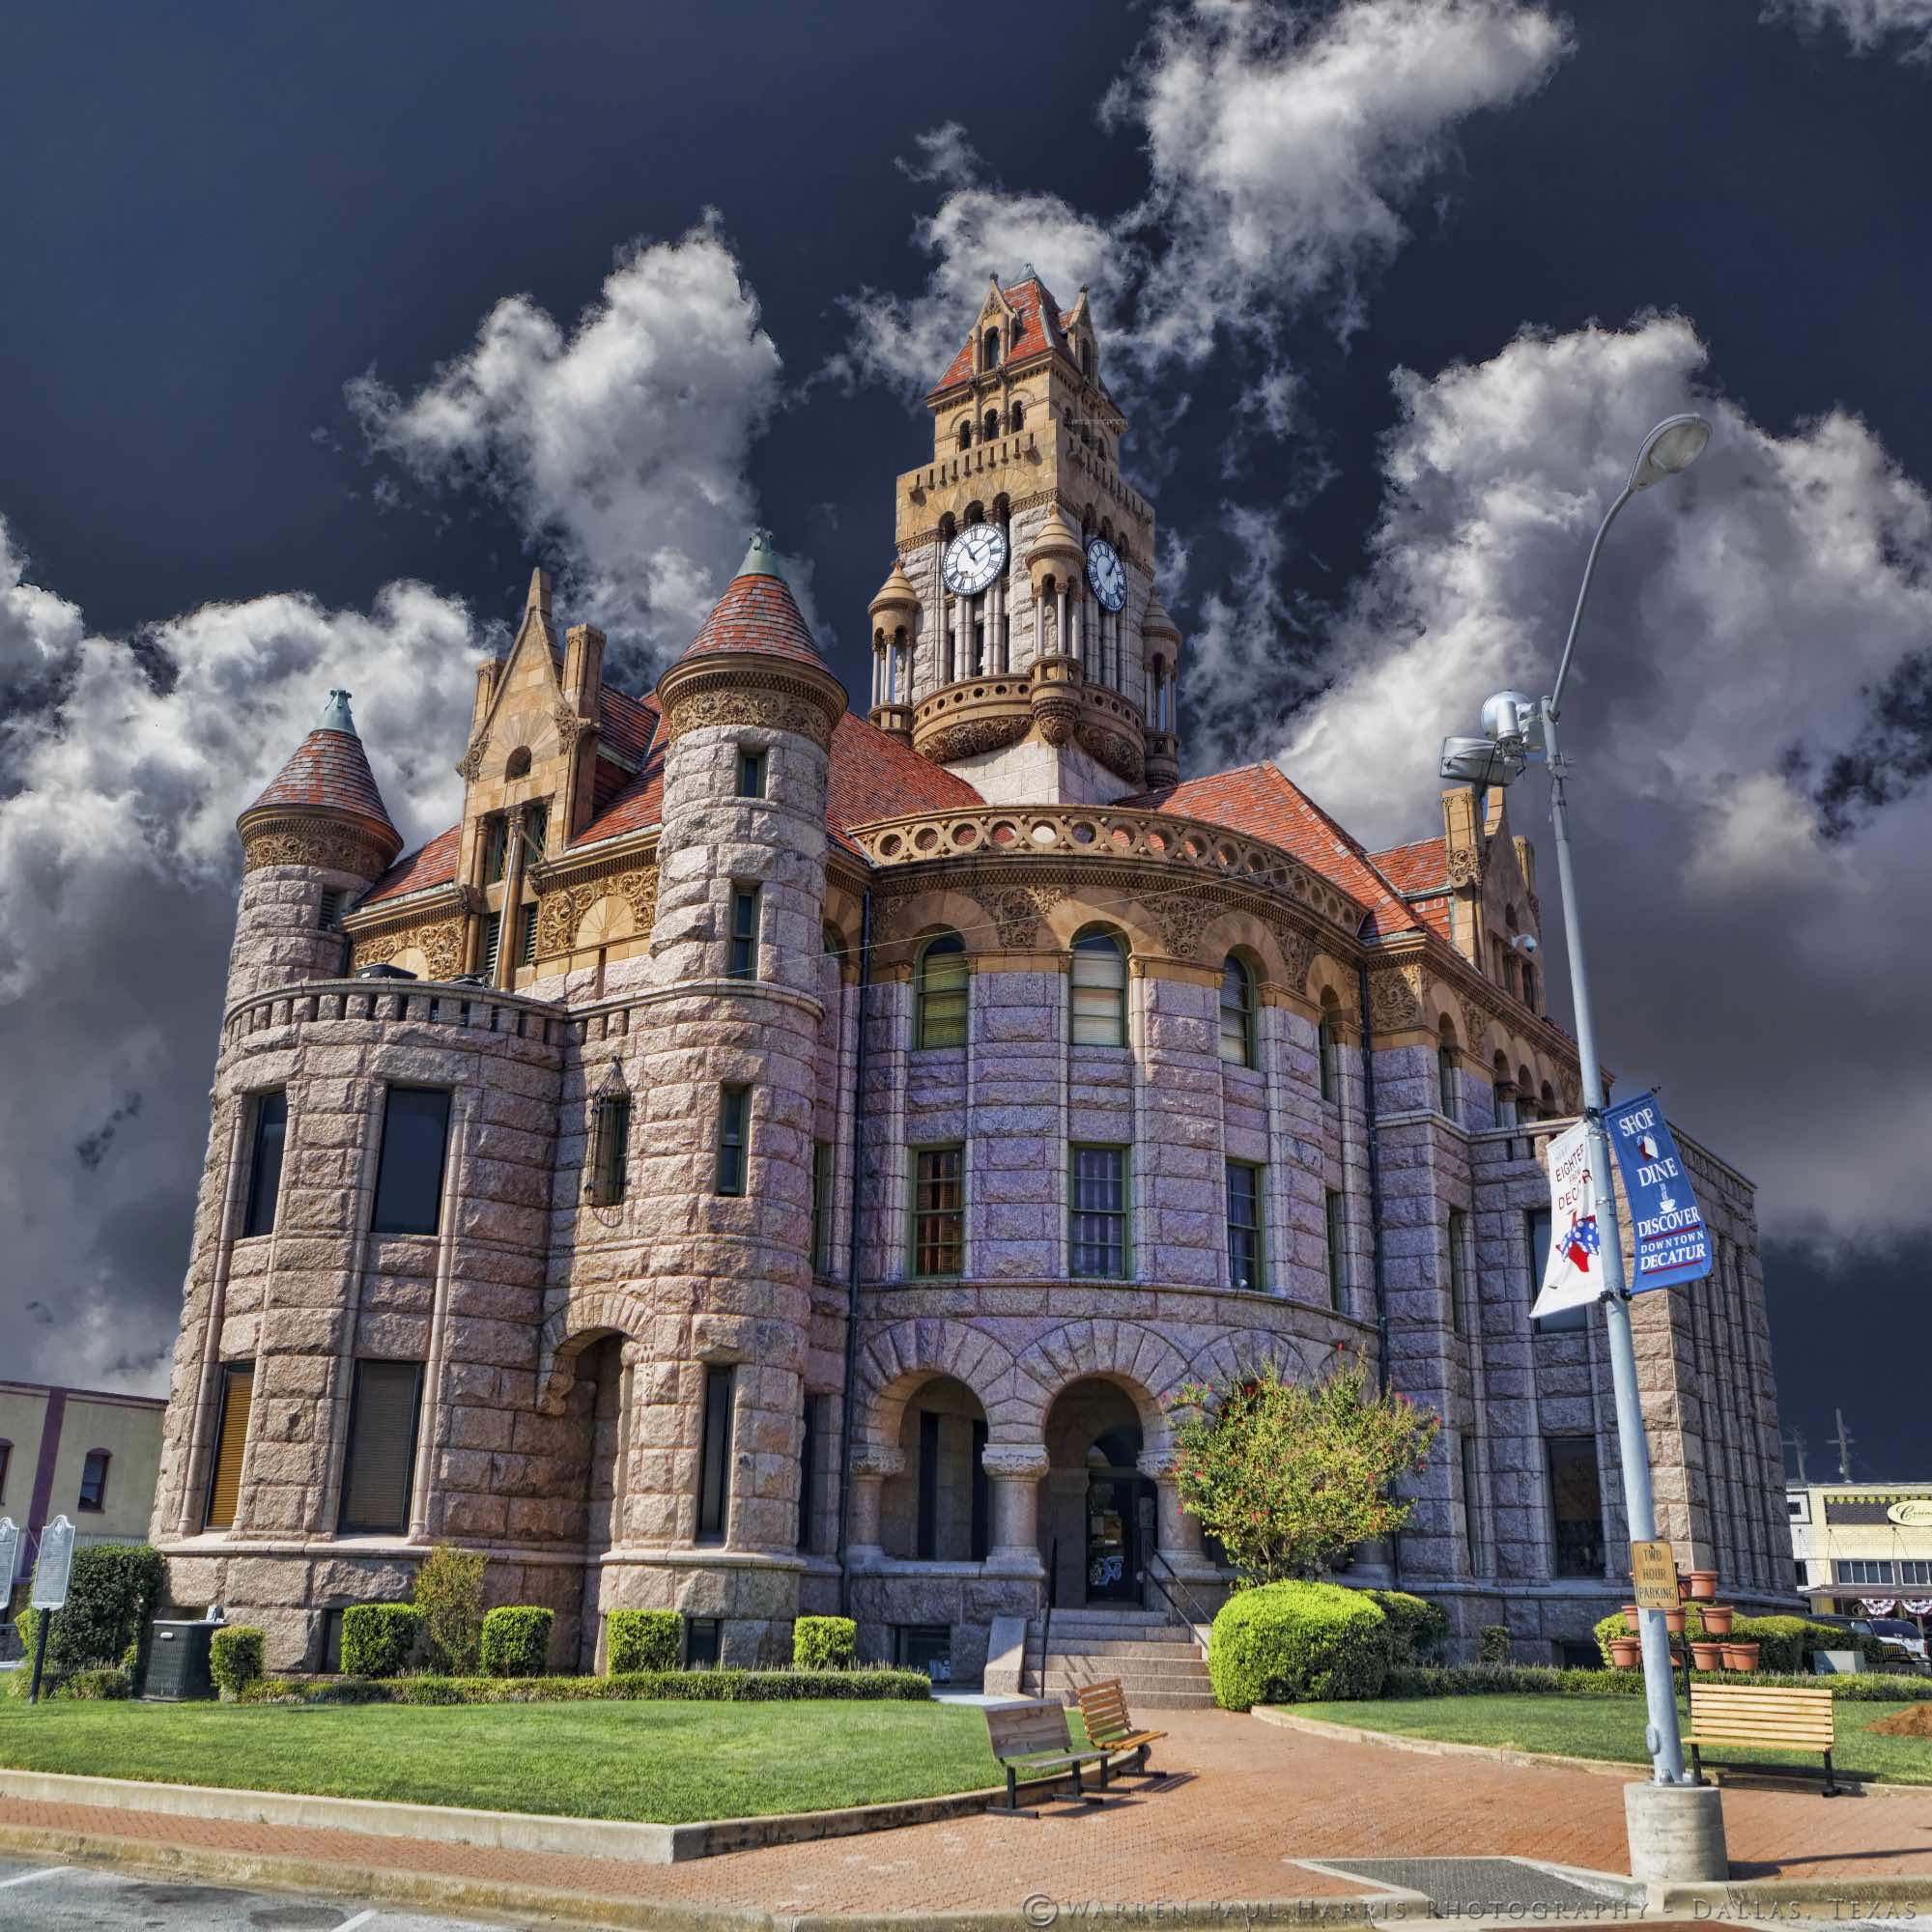 decatur courthouse